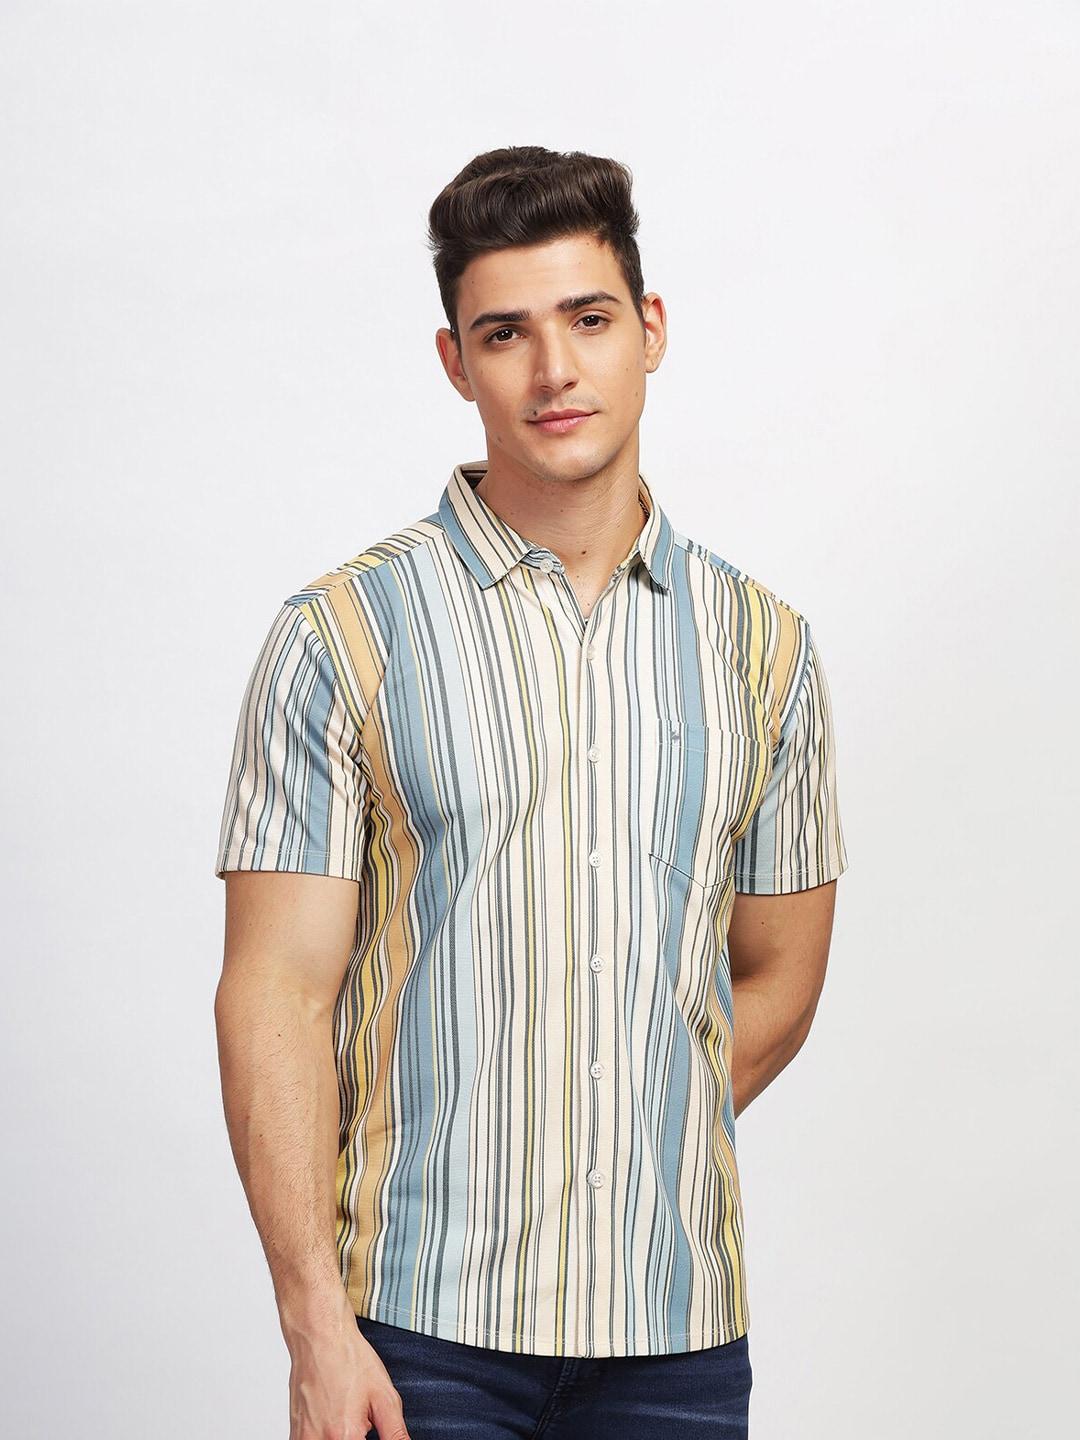 bullmer straight spread collar cotton striped curved casual shirt